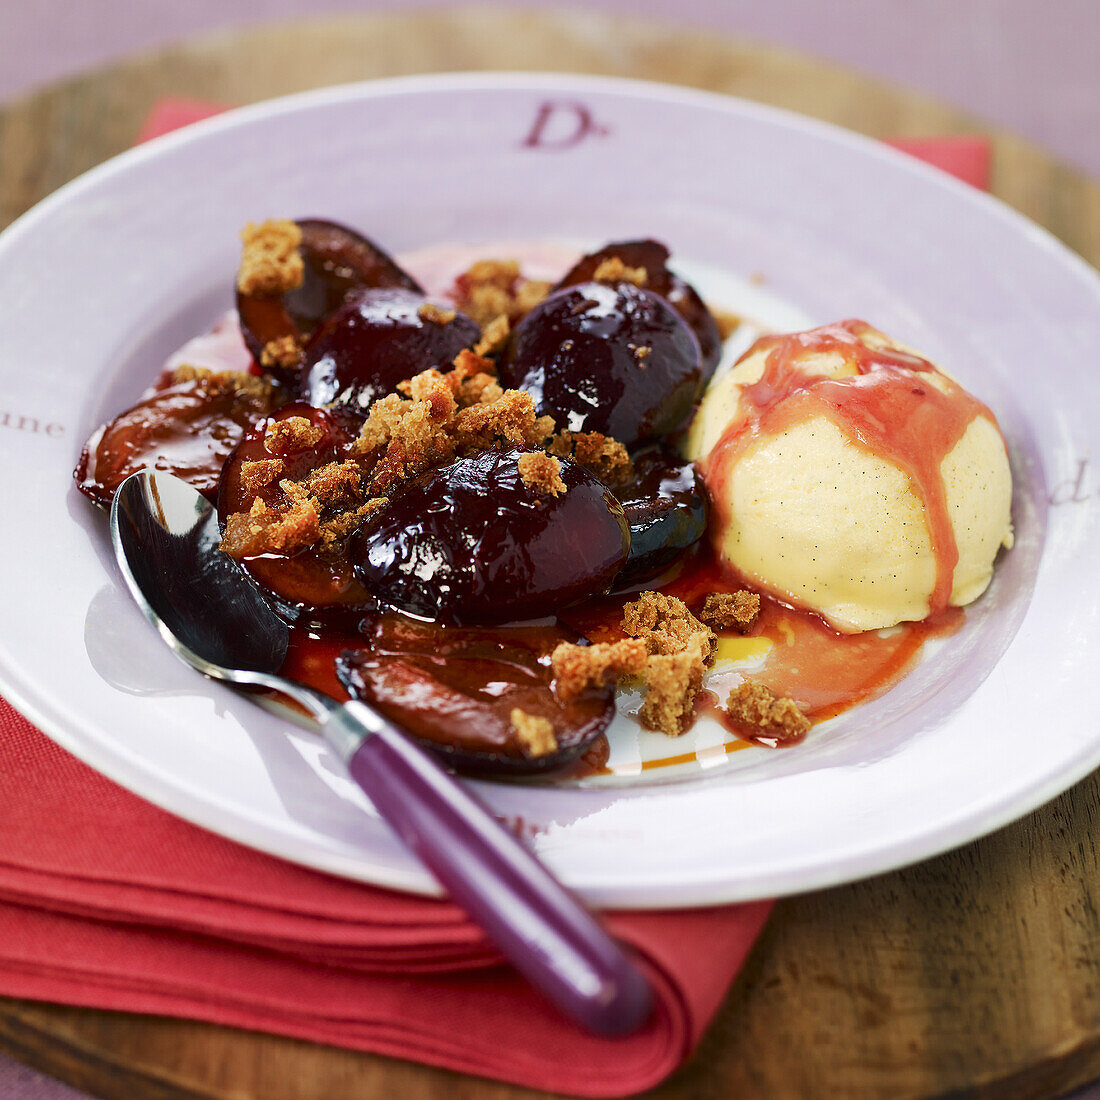 Pan-fried quetsch plums with vanilla ice cream